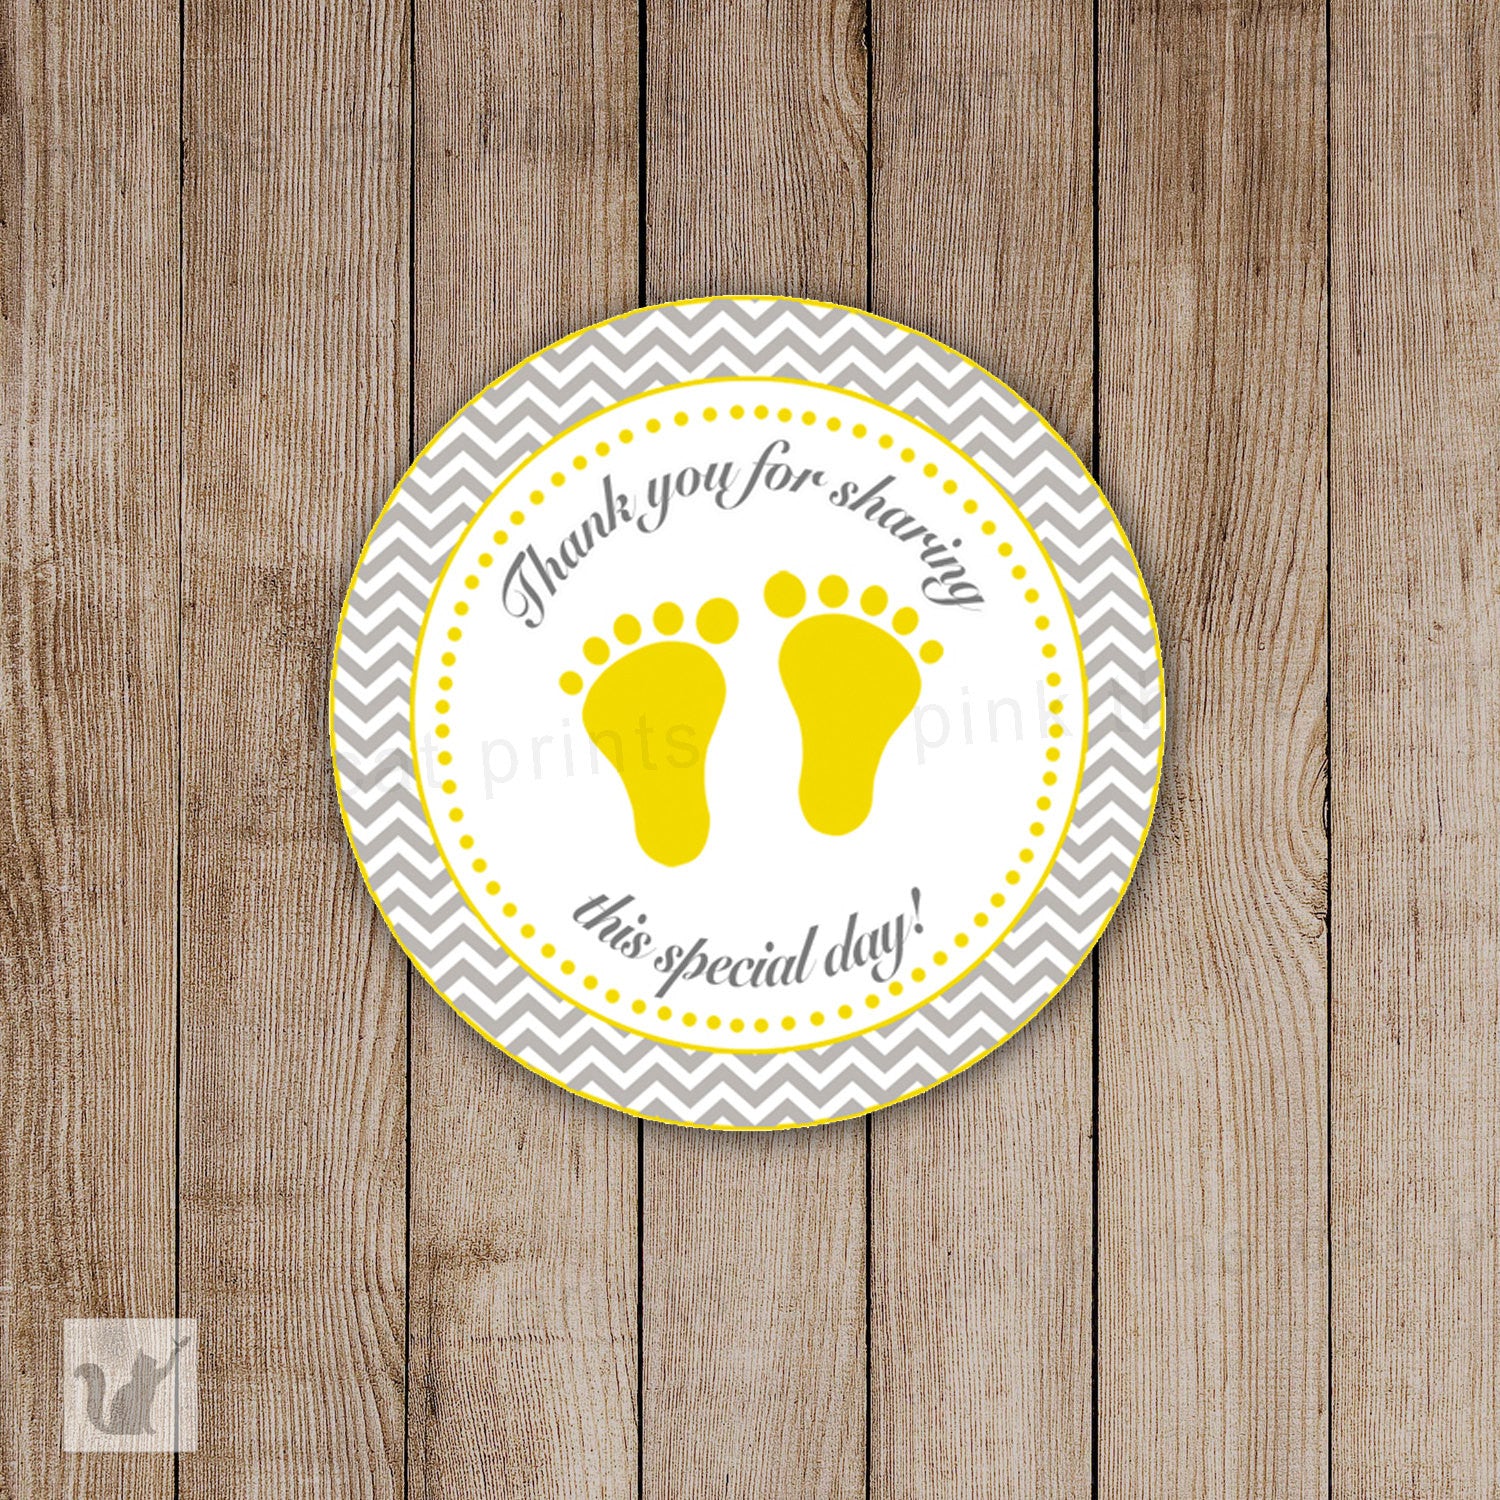 INSTANT DOWNLOAD Yellow Grey Chevron Baby Shower Thank You Tags Label - Polka Dots Baby Feet Unisex Baby Shower Favors Baby Shower Items